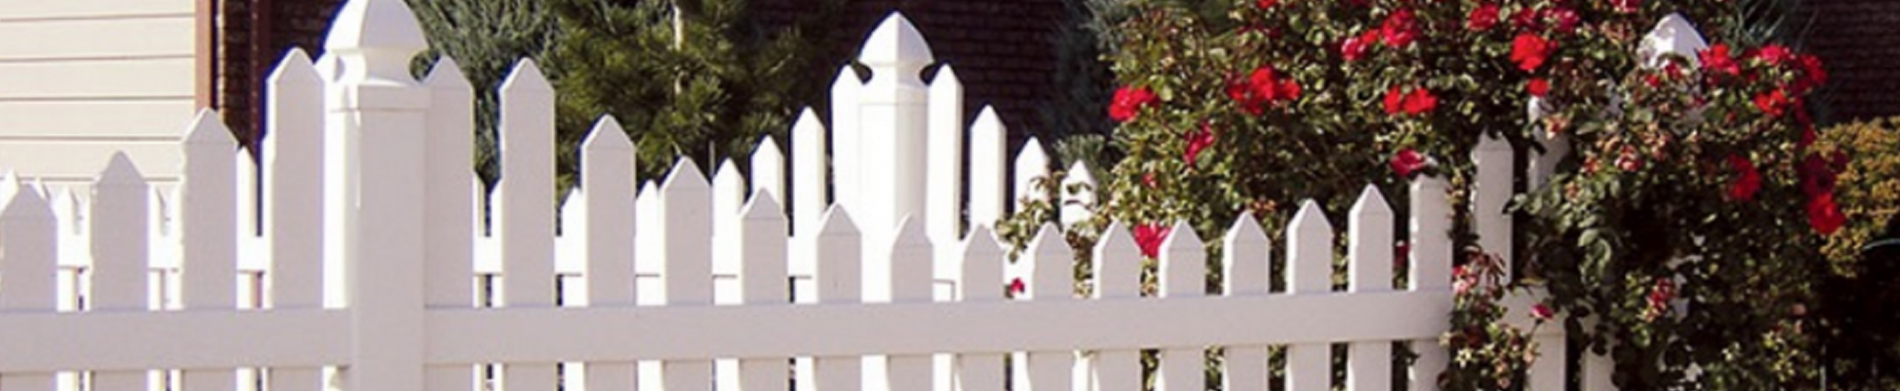 Order a vinyl fence in Orange County from Duramax – Mark is happy installing a new fence around his home